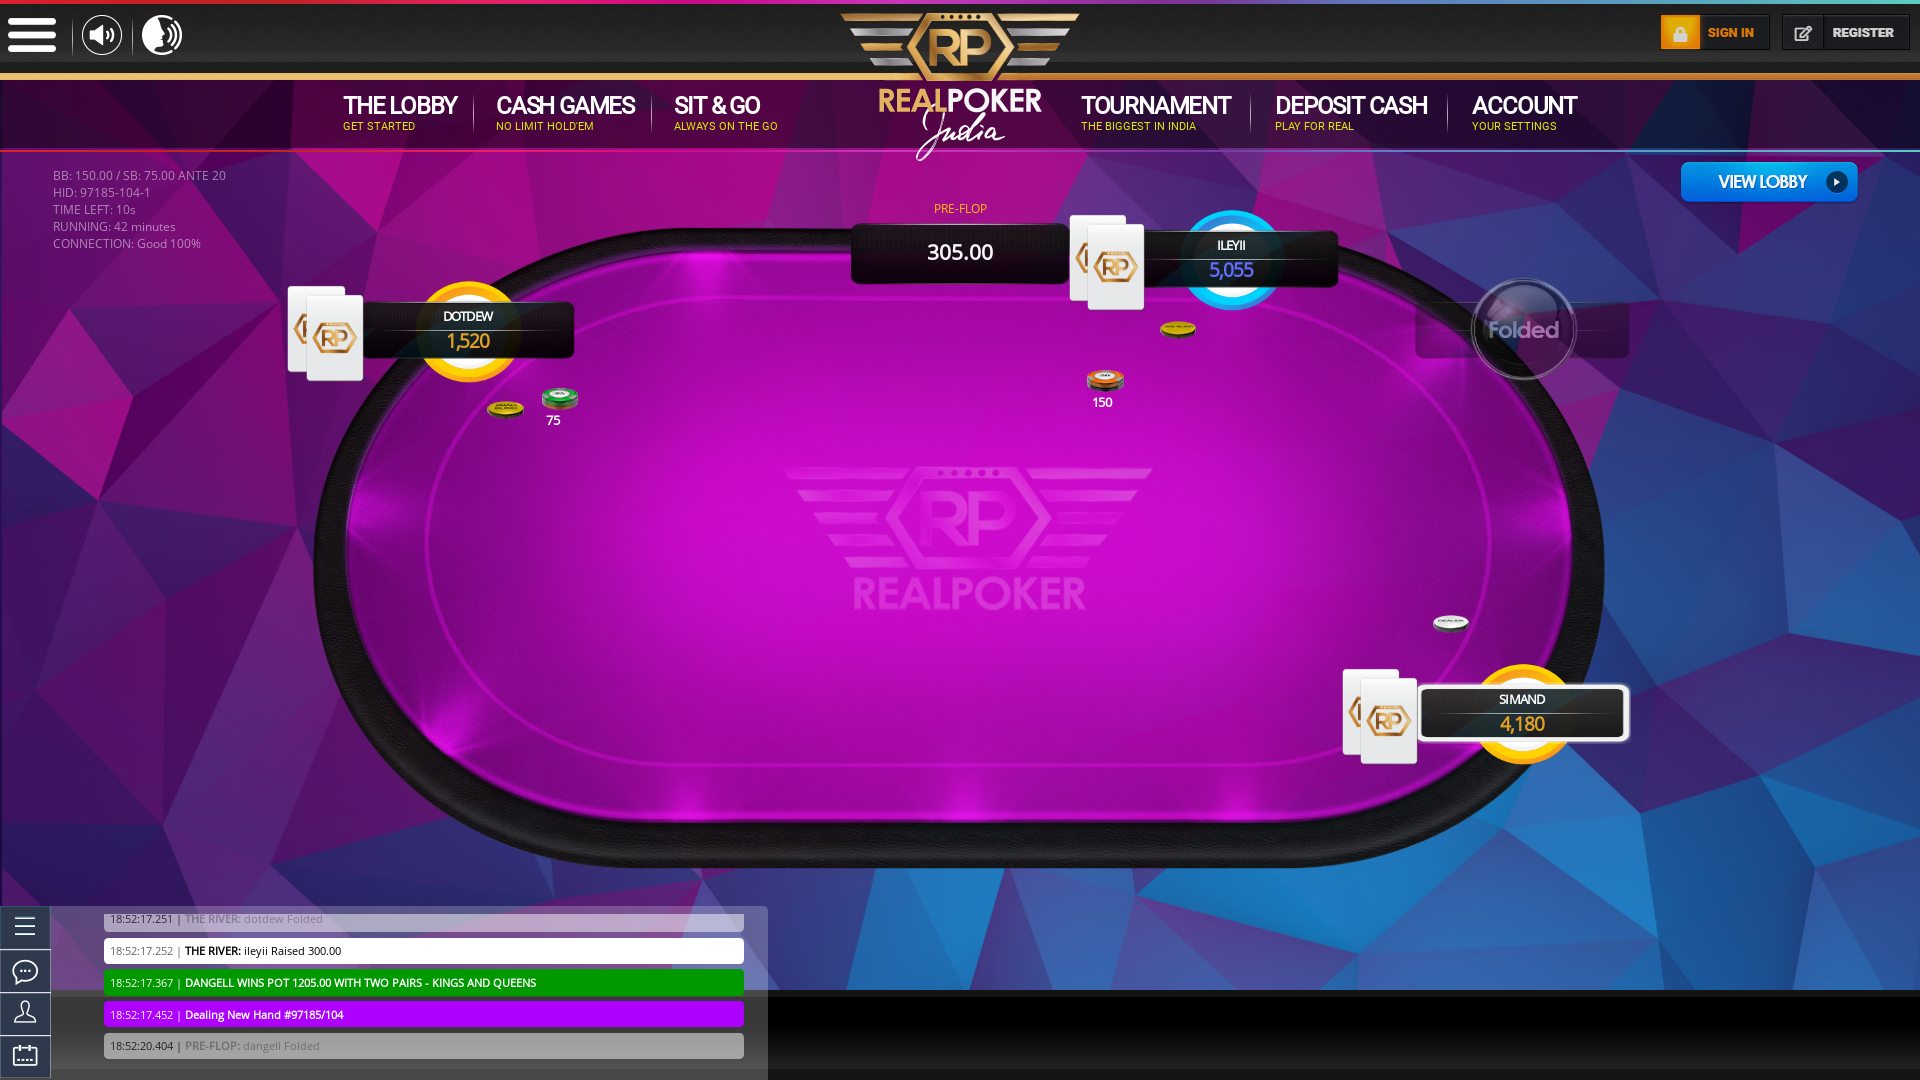 Online poker on a 10 player table in the 42nd minute match up